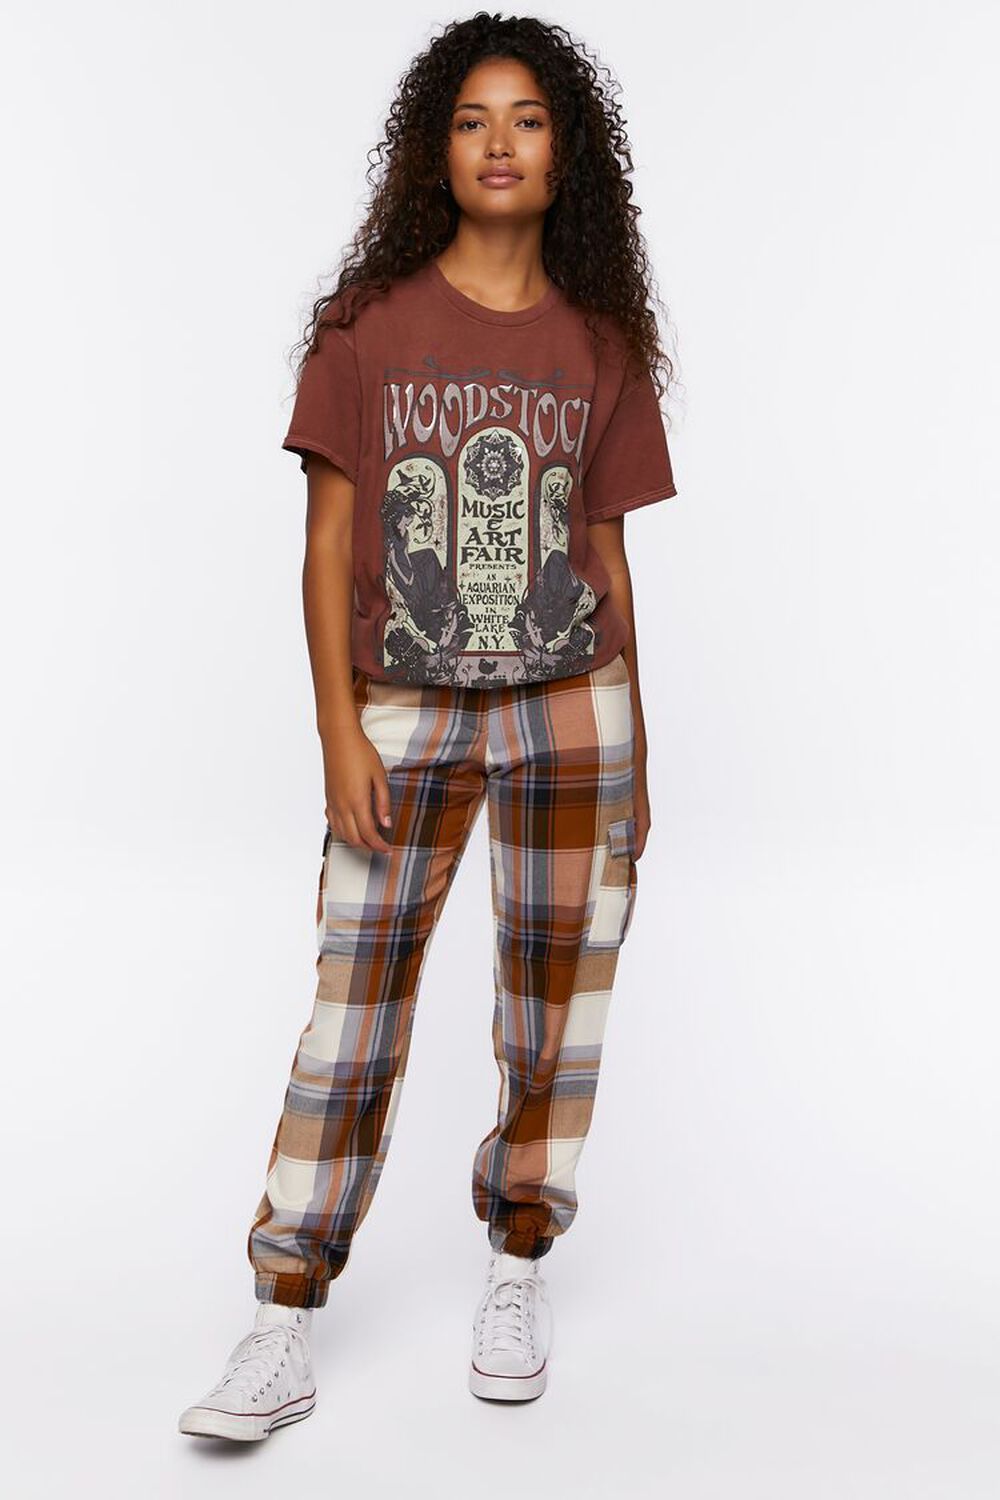 Woodstock Graphic Tee | Forever 21 (US)